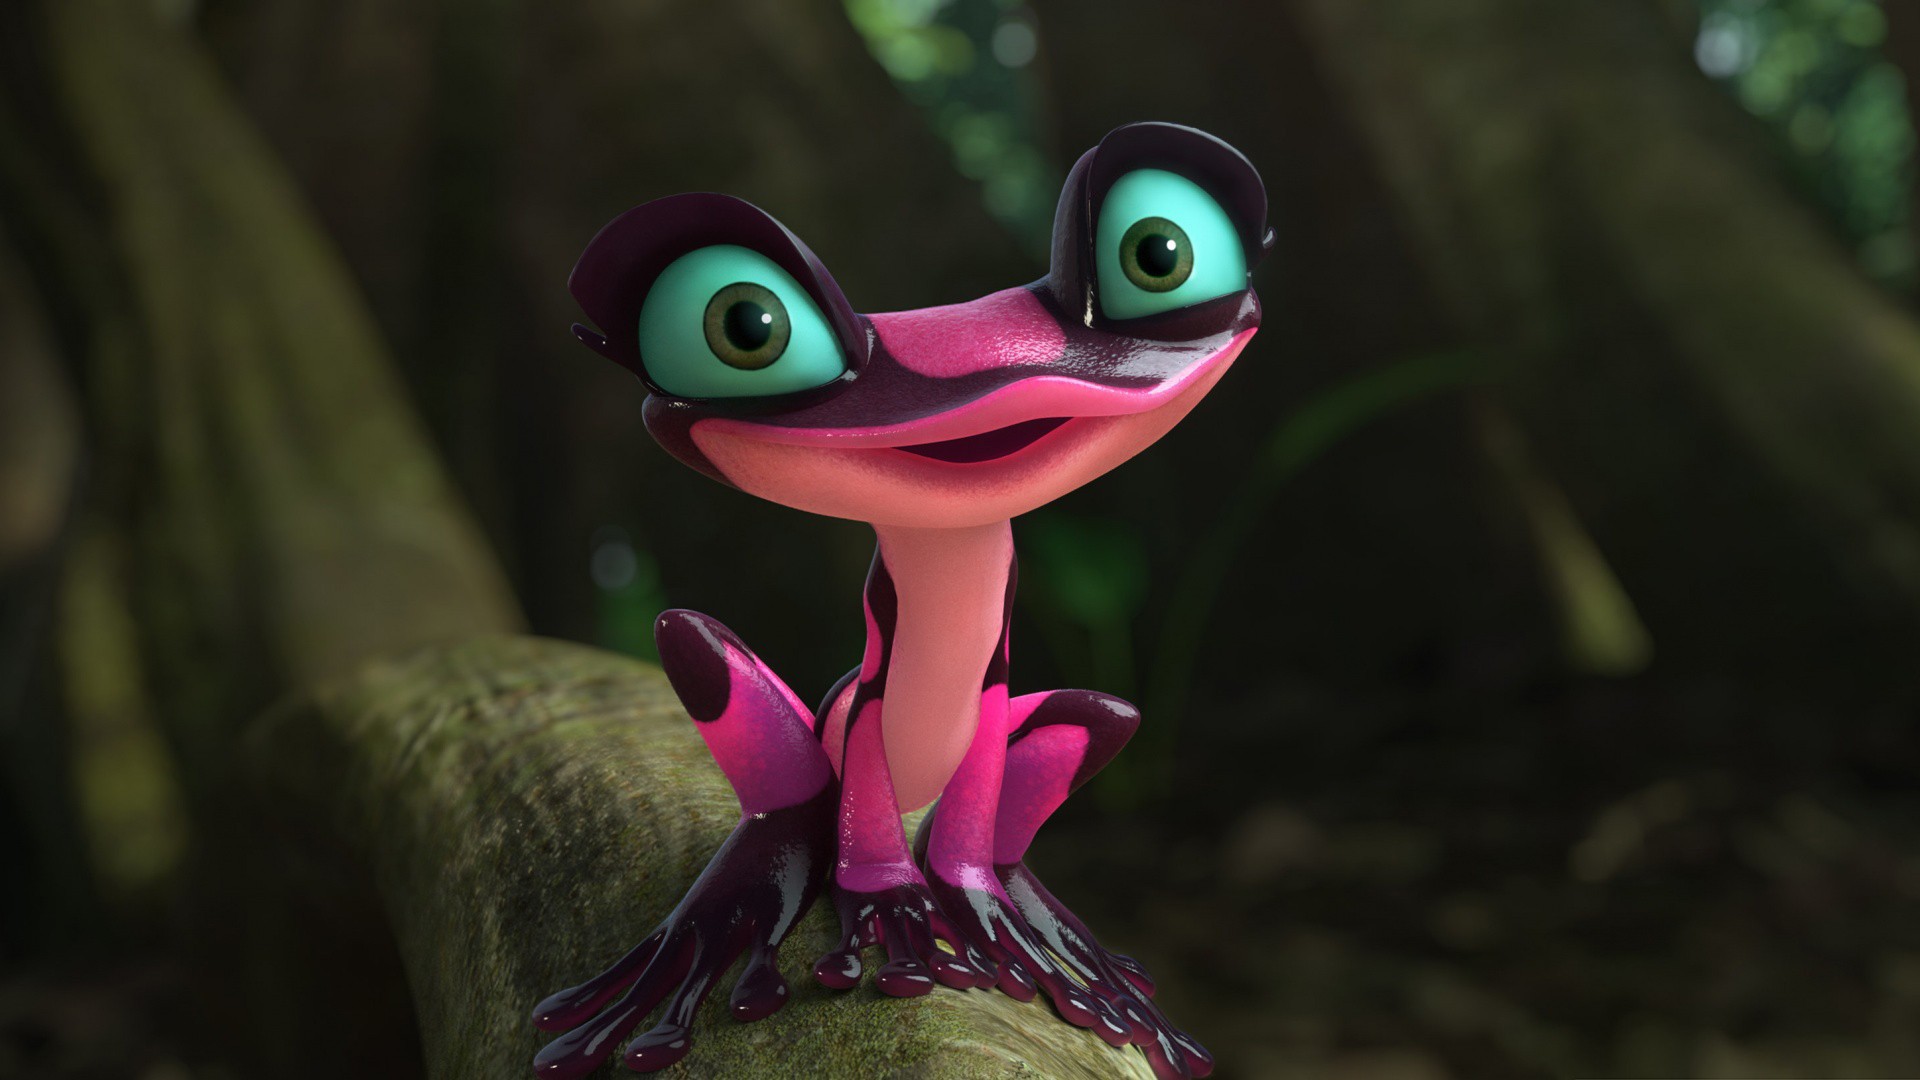 Cute frog cartoon wallpapers and images   wallpapers pictures photos